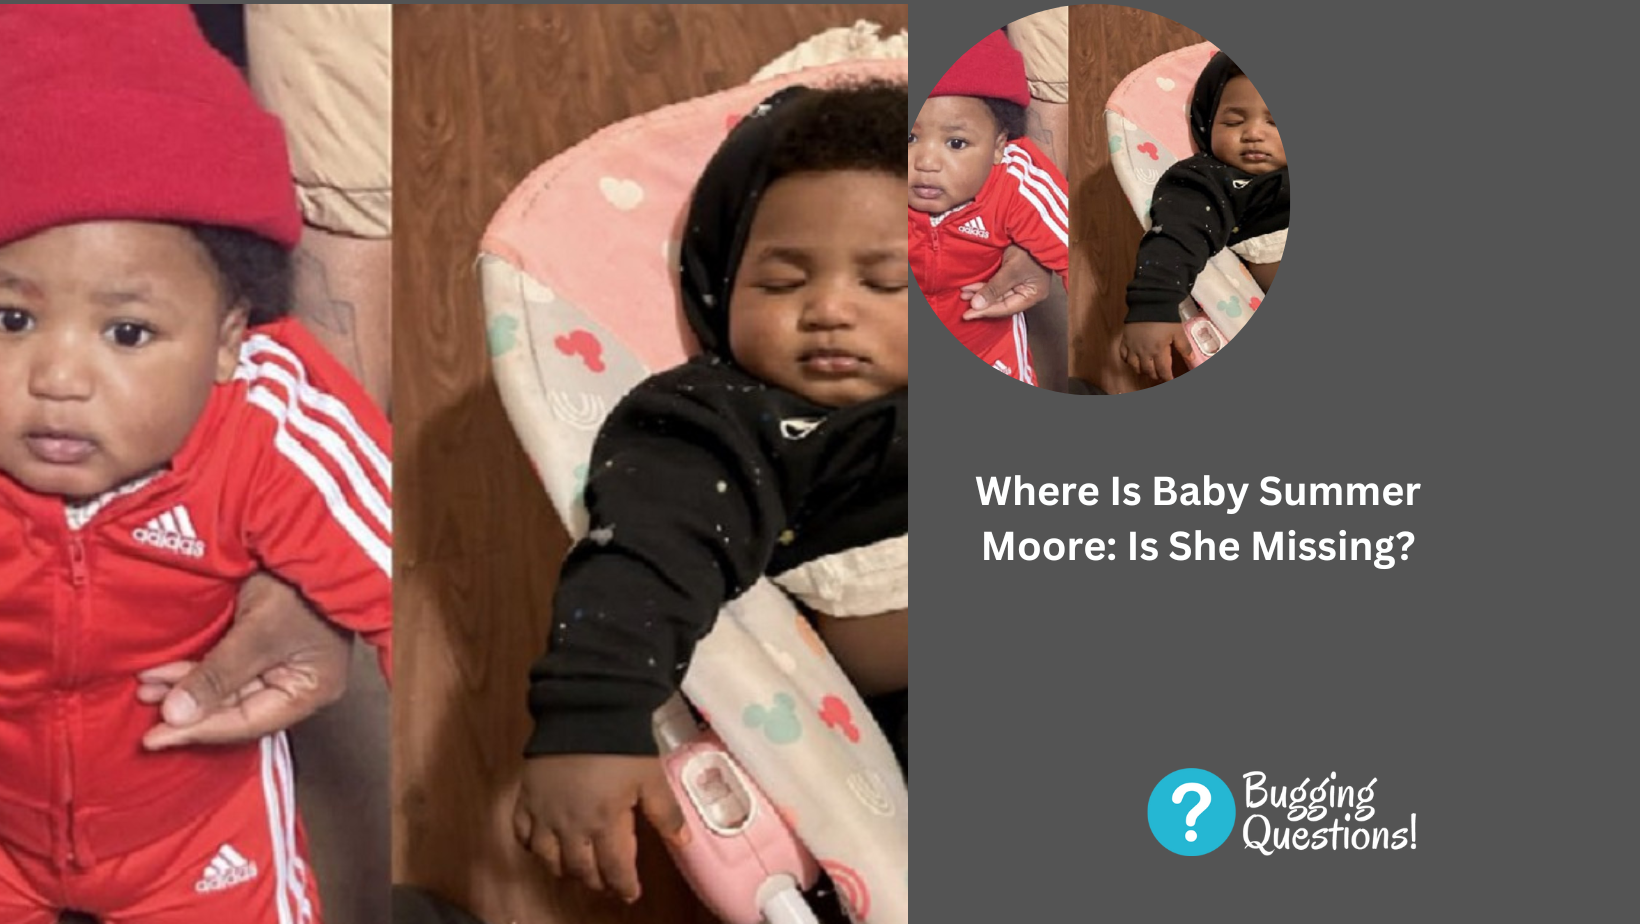 Where Is Baby Summer Moore: Is She Missing?